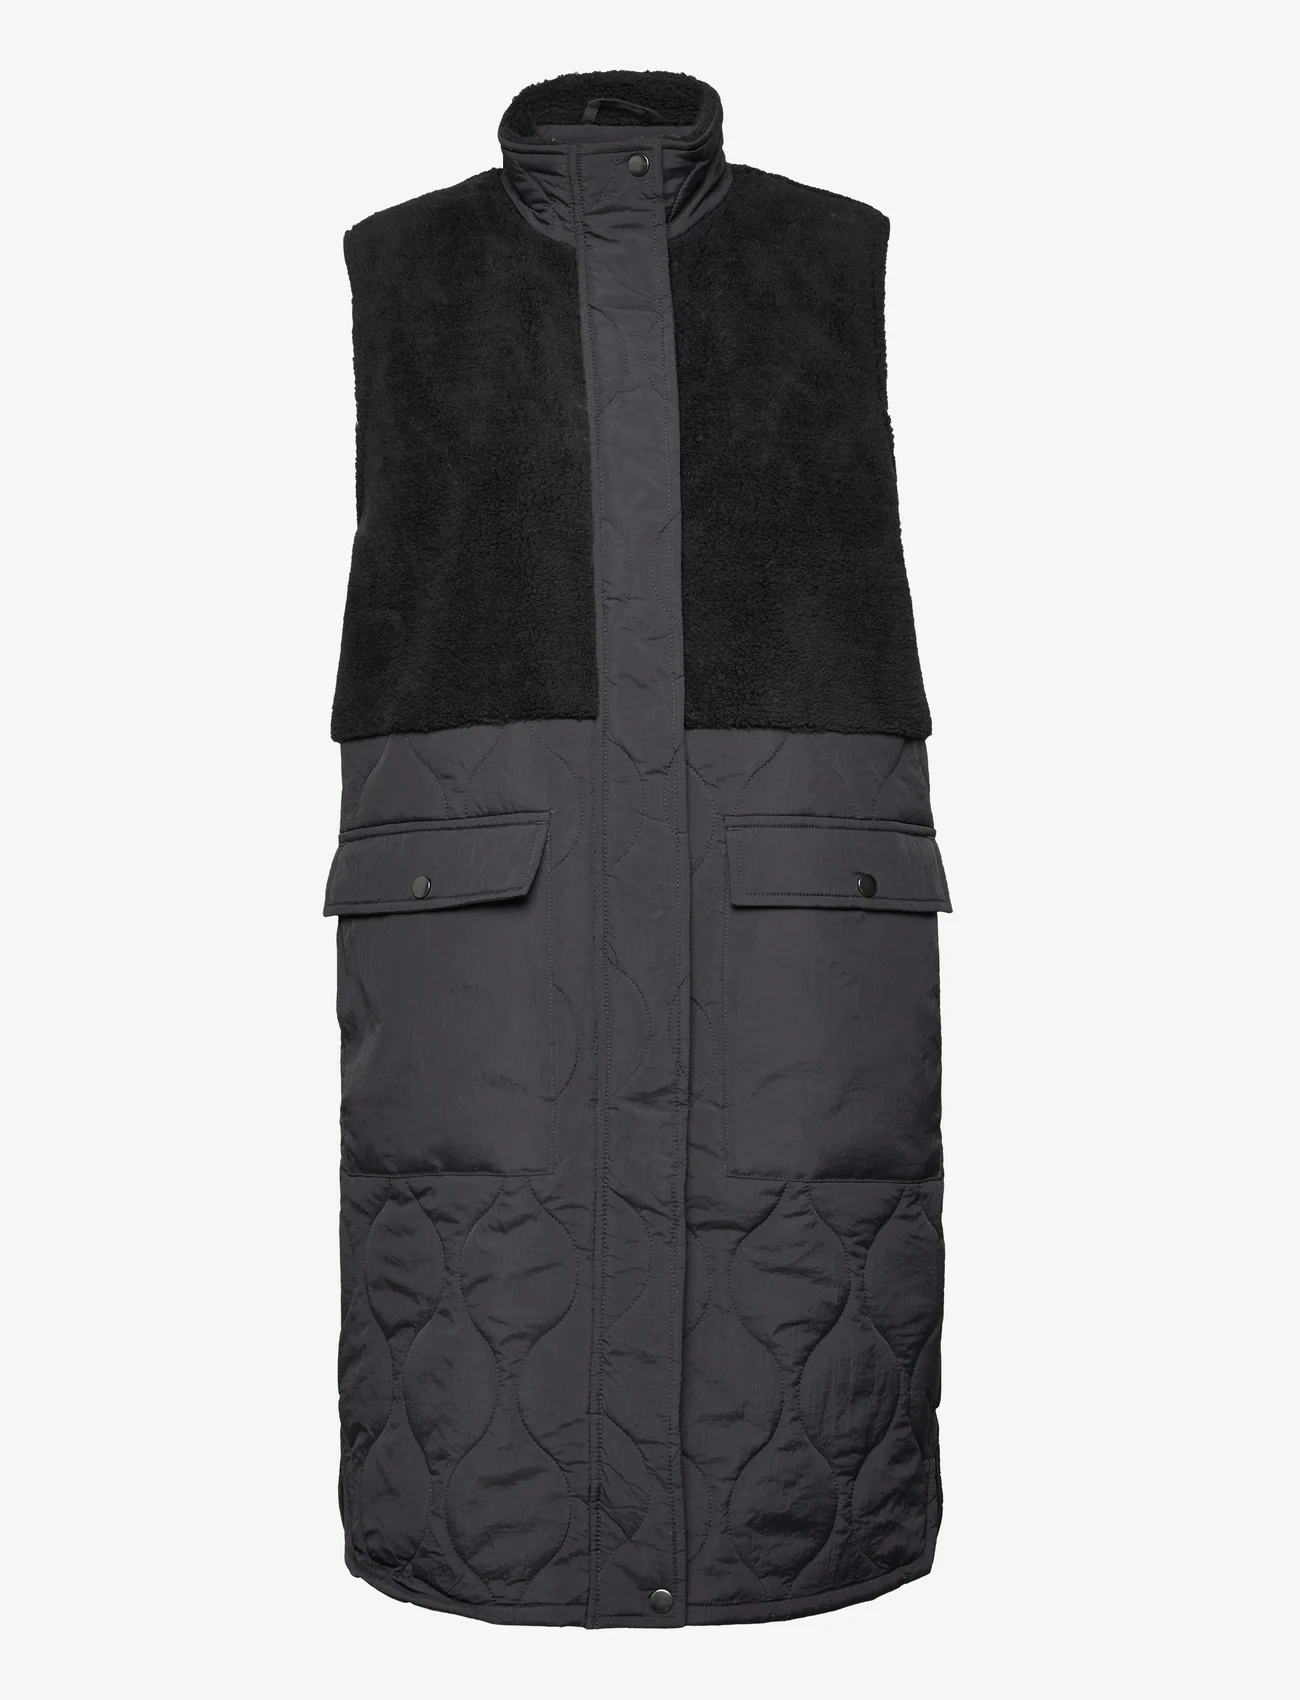 Weather Report - Hollie W Long Quilted Vest - steppwesten - phantom - 0